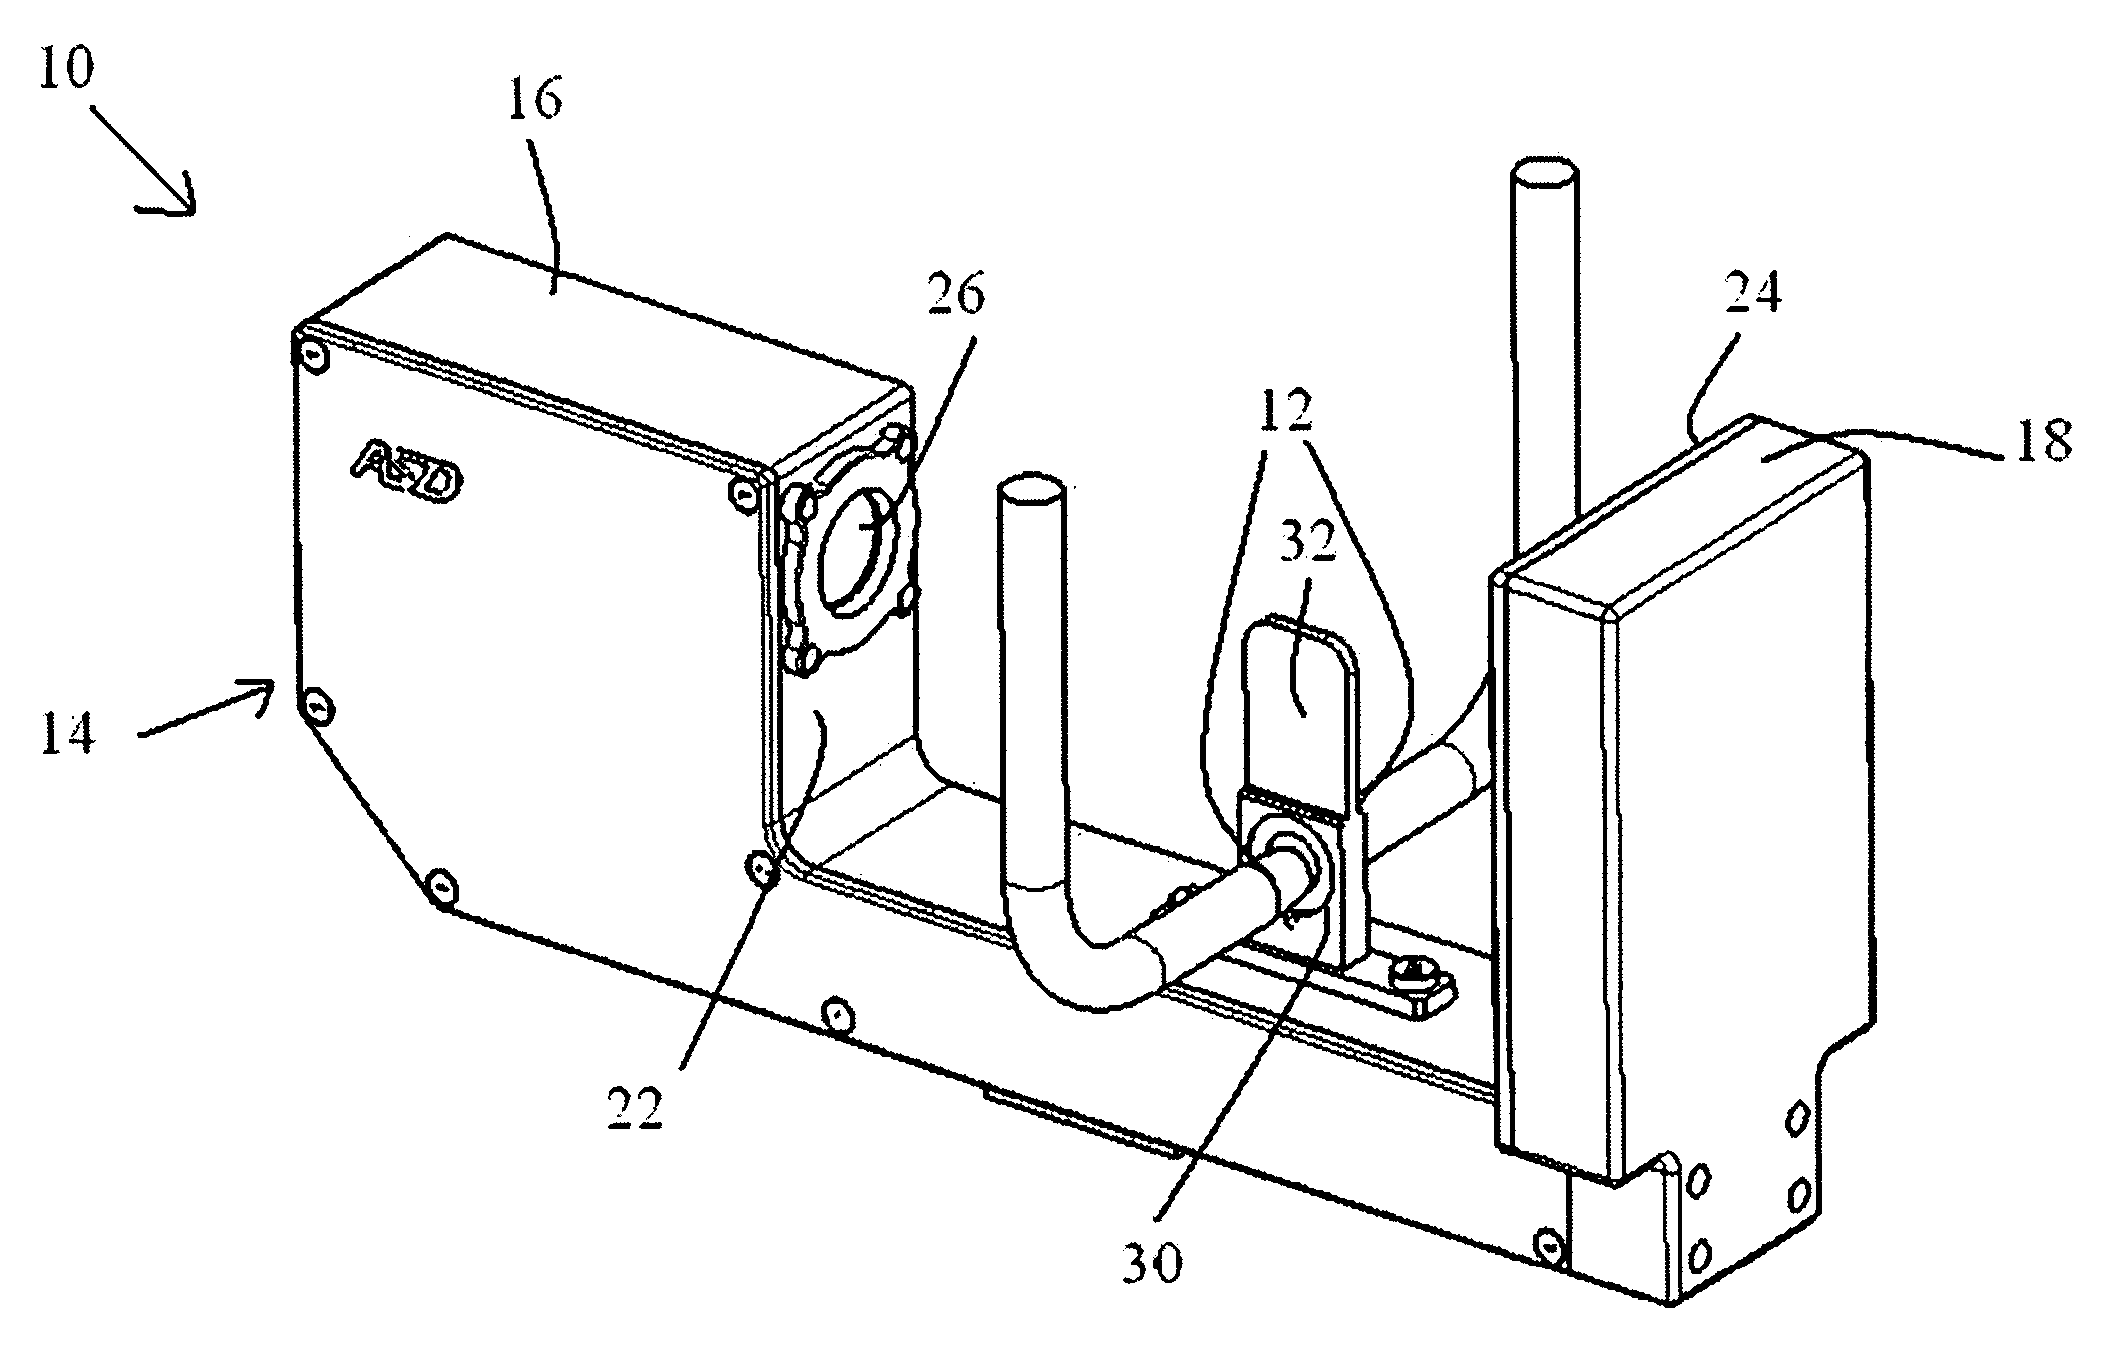 Method and Device for Measuring Resistance Spot Welding Electrode Tips While Connected to a Robotic Welder